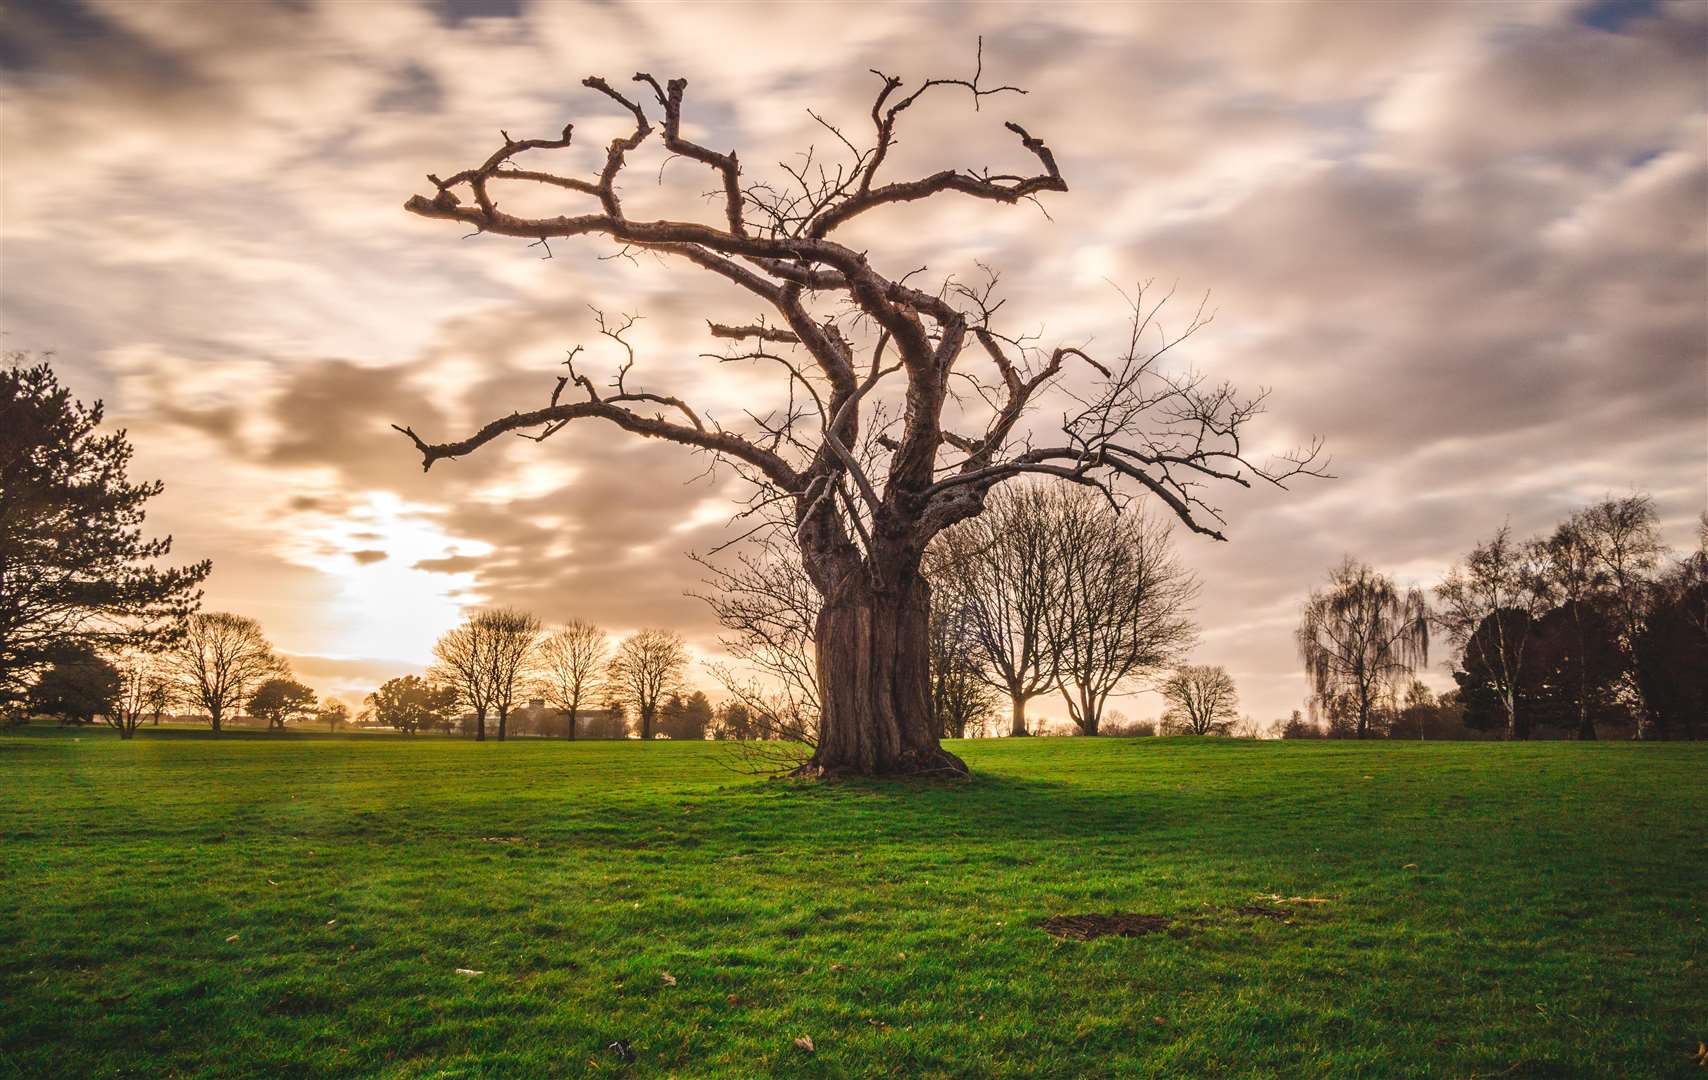 The winner of the Seasons category in the Mote Park Photographic Competition, by Rob Swan